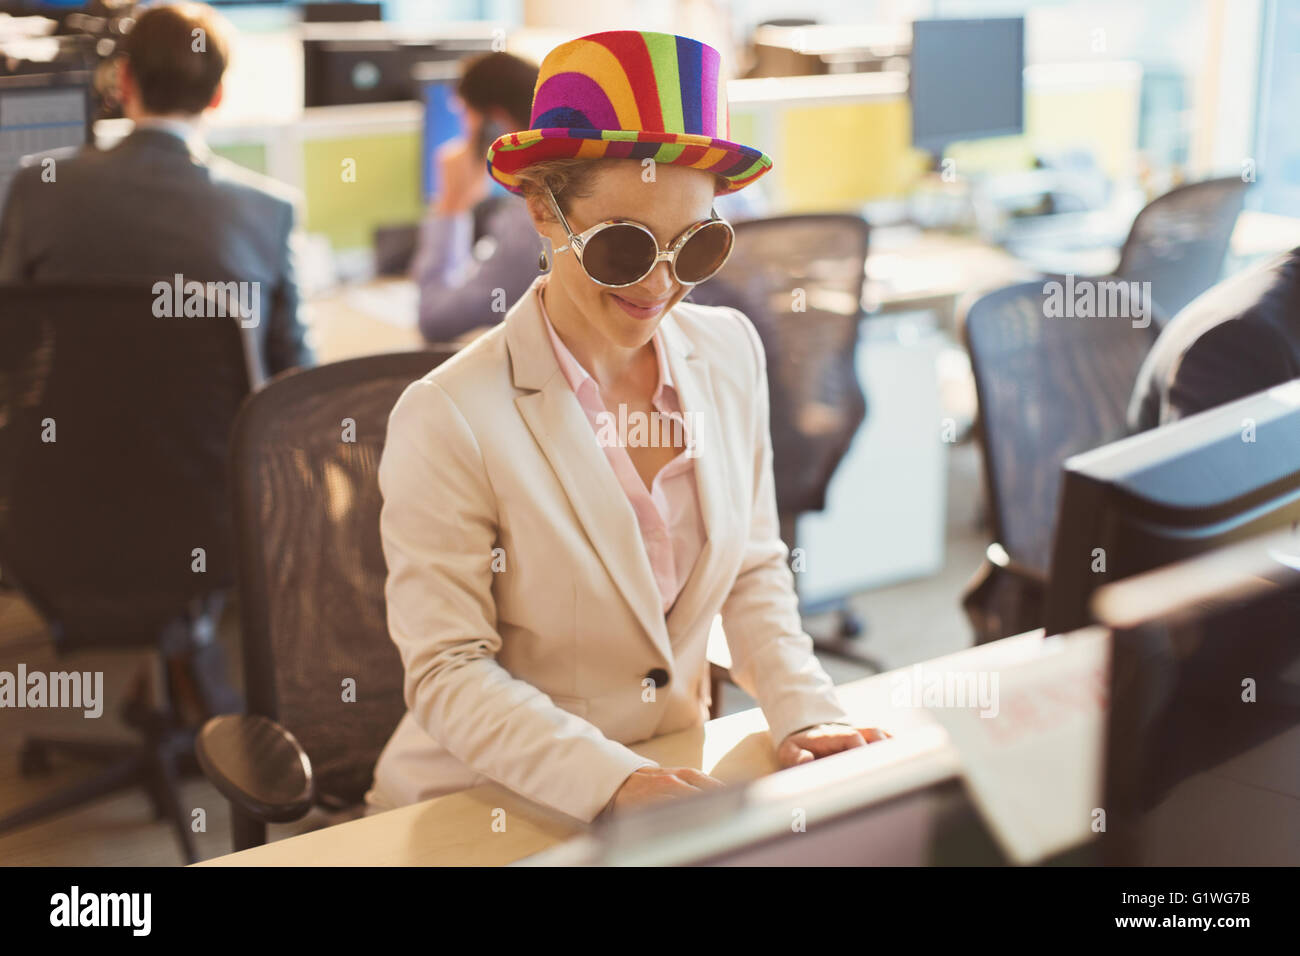 Playful businesswoman wearing silly sunglasses and striped hat at computer in office Stock Photo